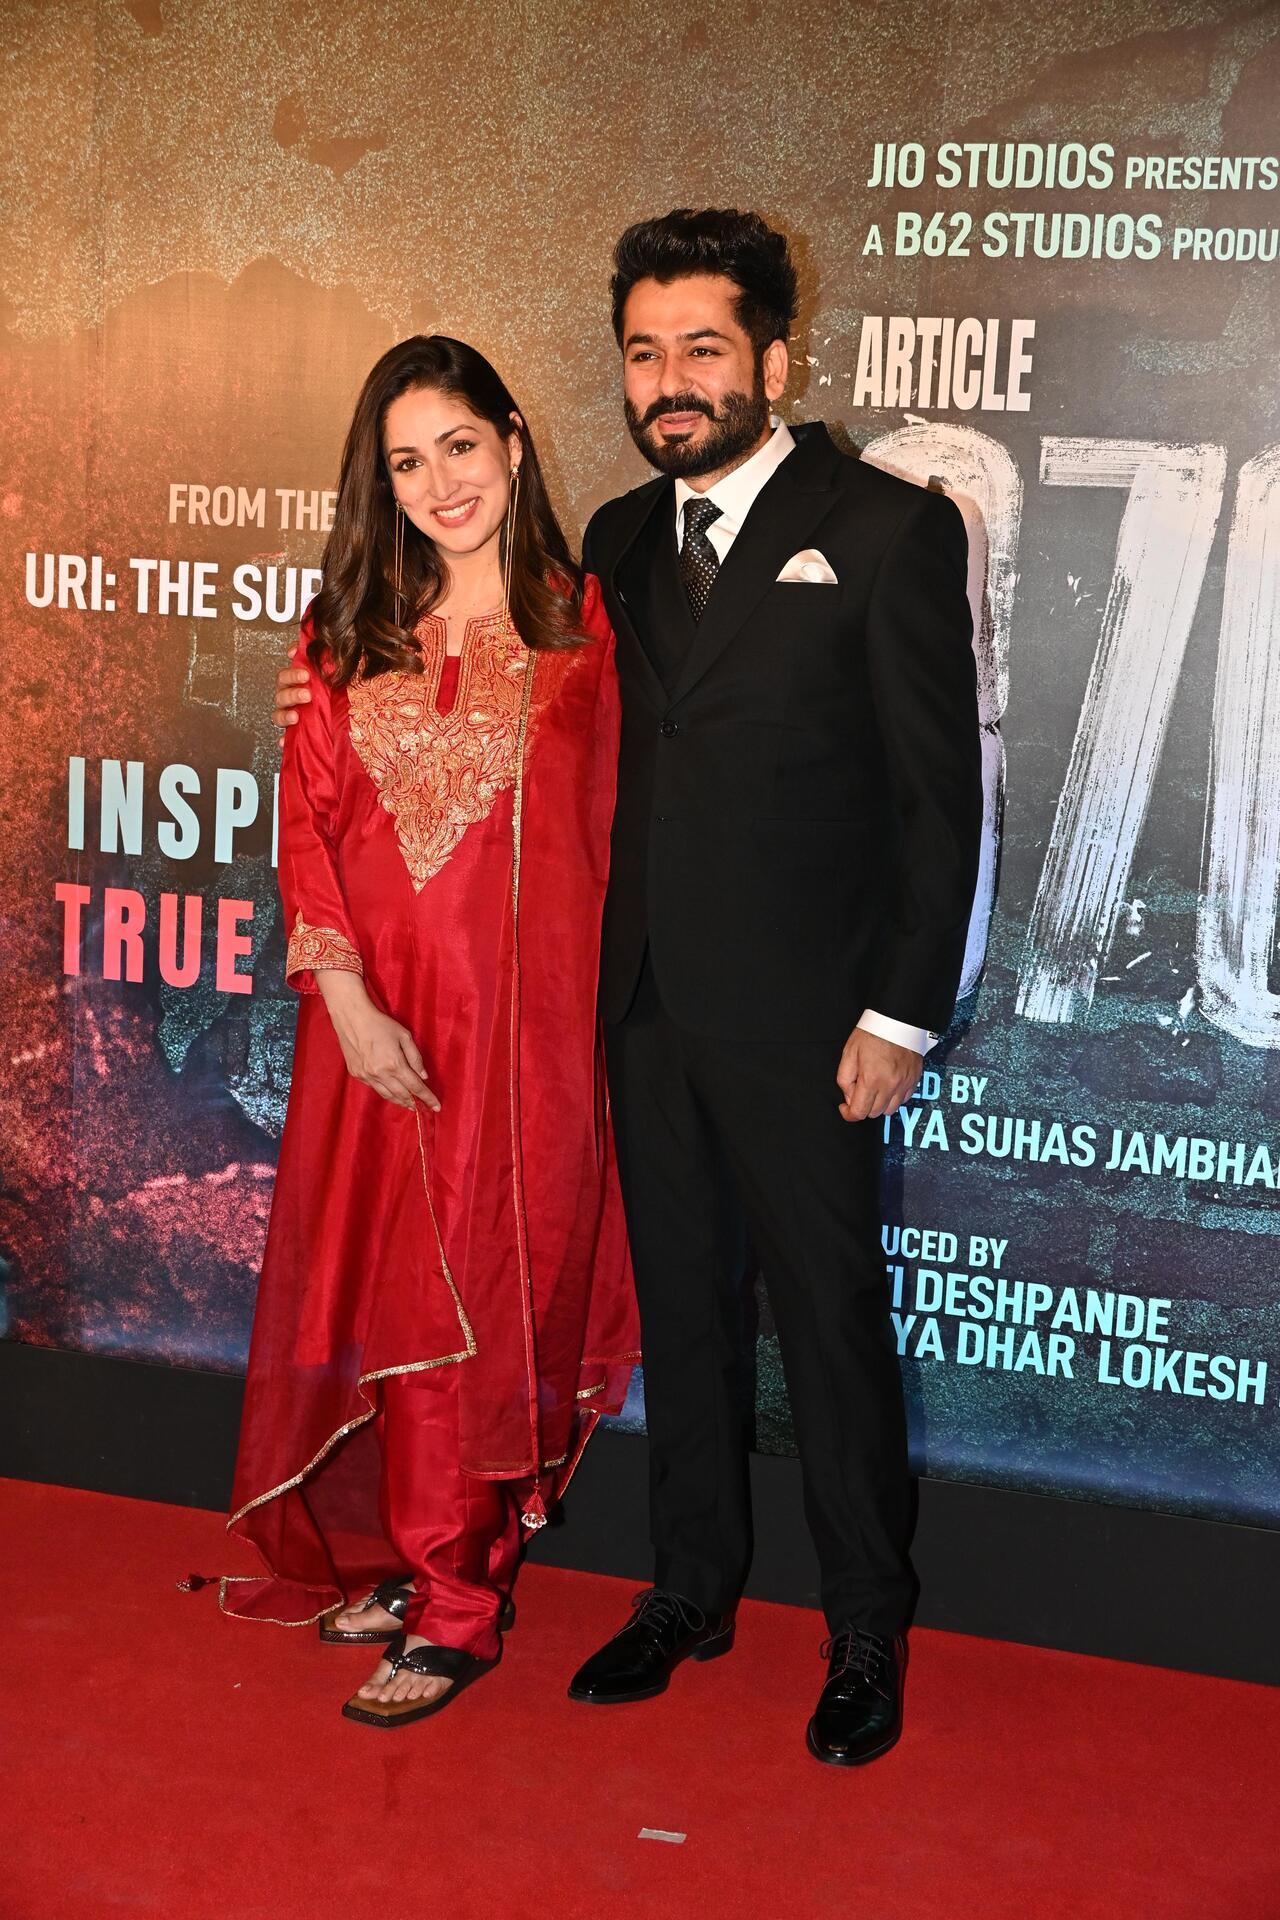 Parents-to-be Yami Gautam and Aditya Dhar pose together at the premiere of their film